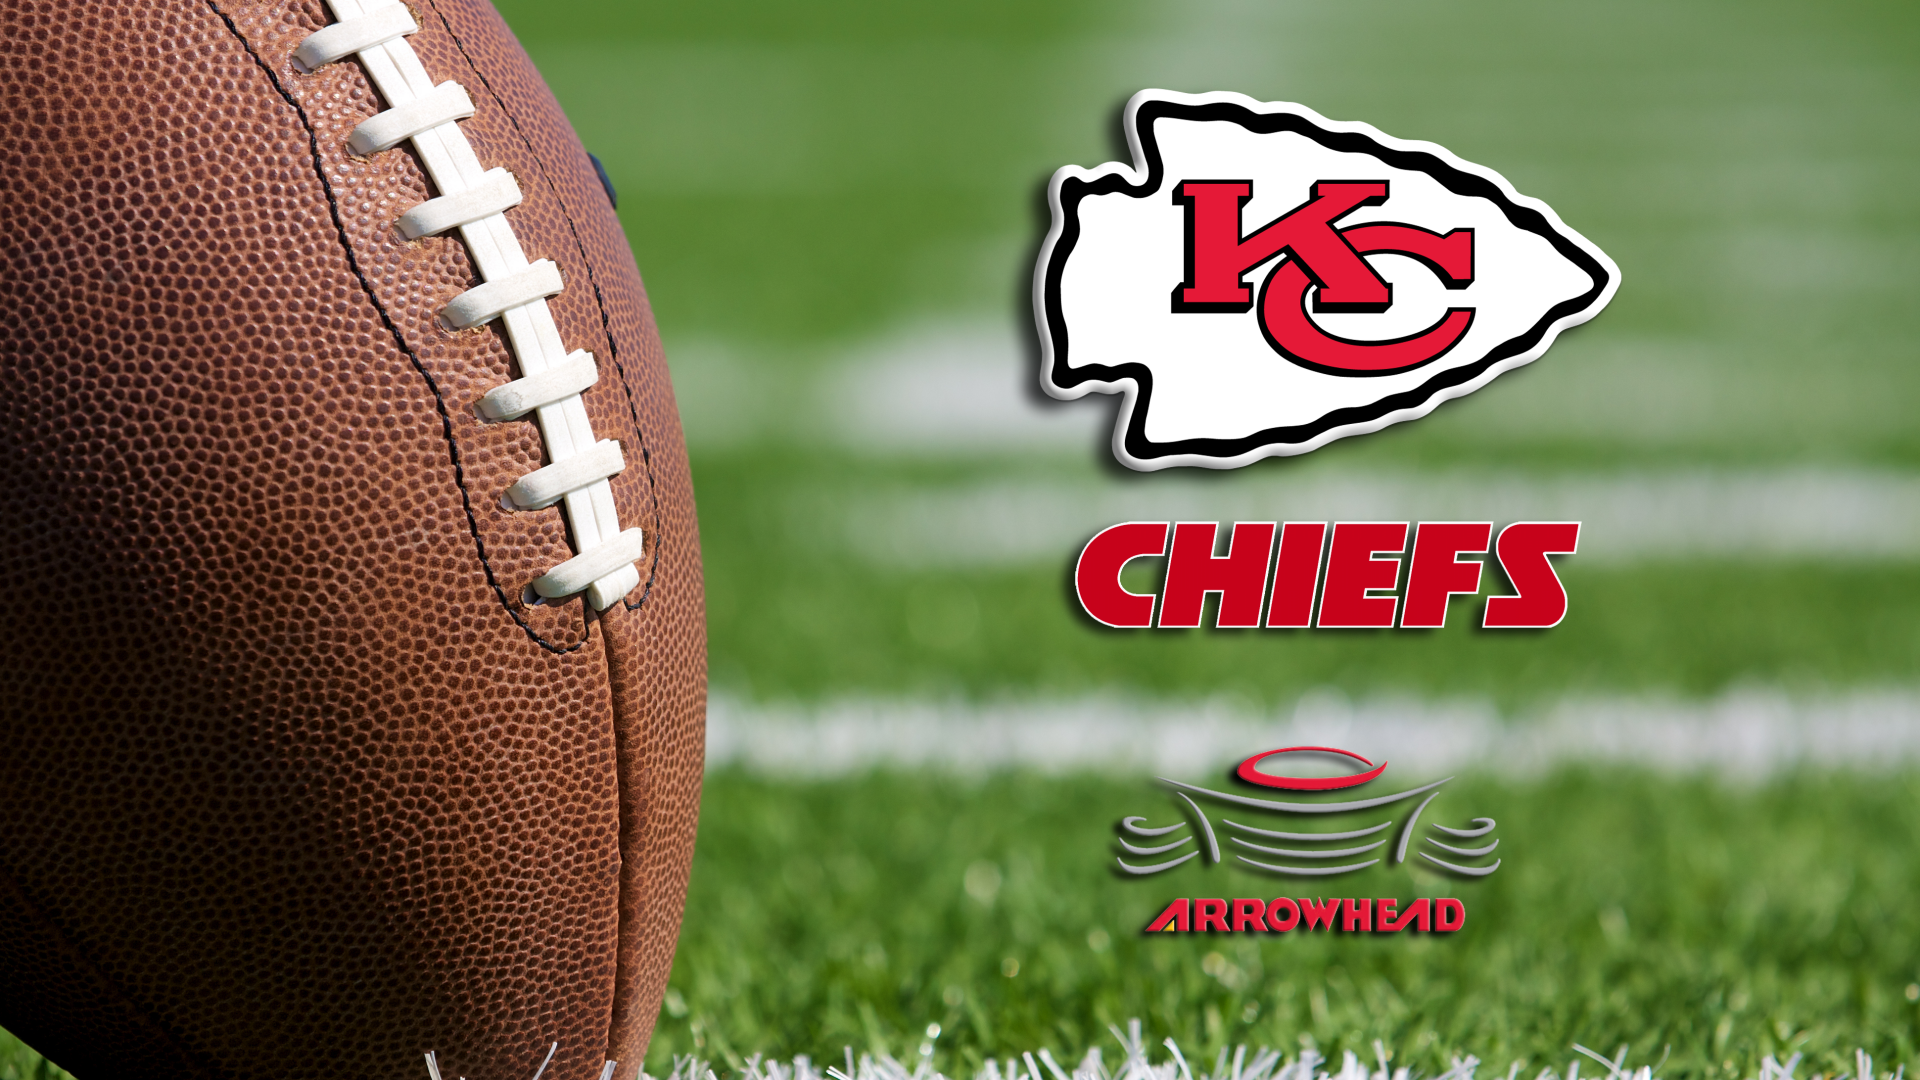 Download wallpapers kansas city chiefs for desktop free High Quality HD  pictures wallpapers  Page 1